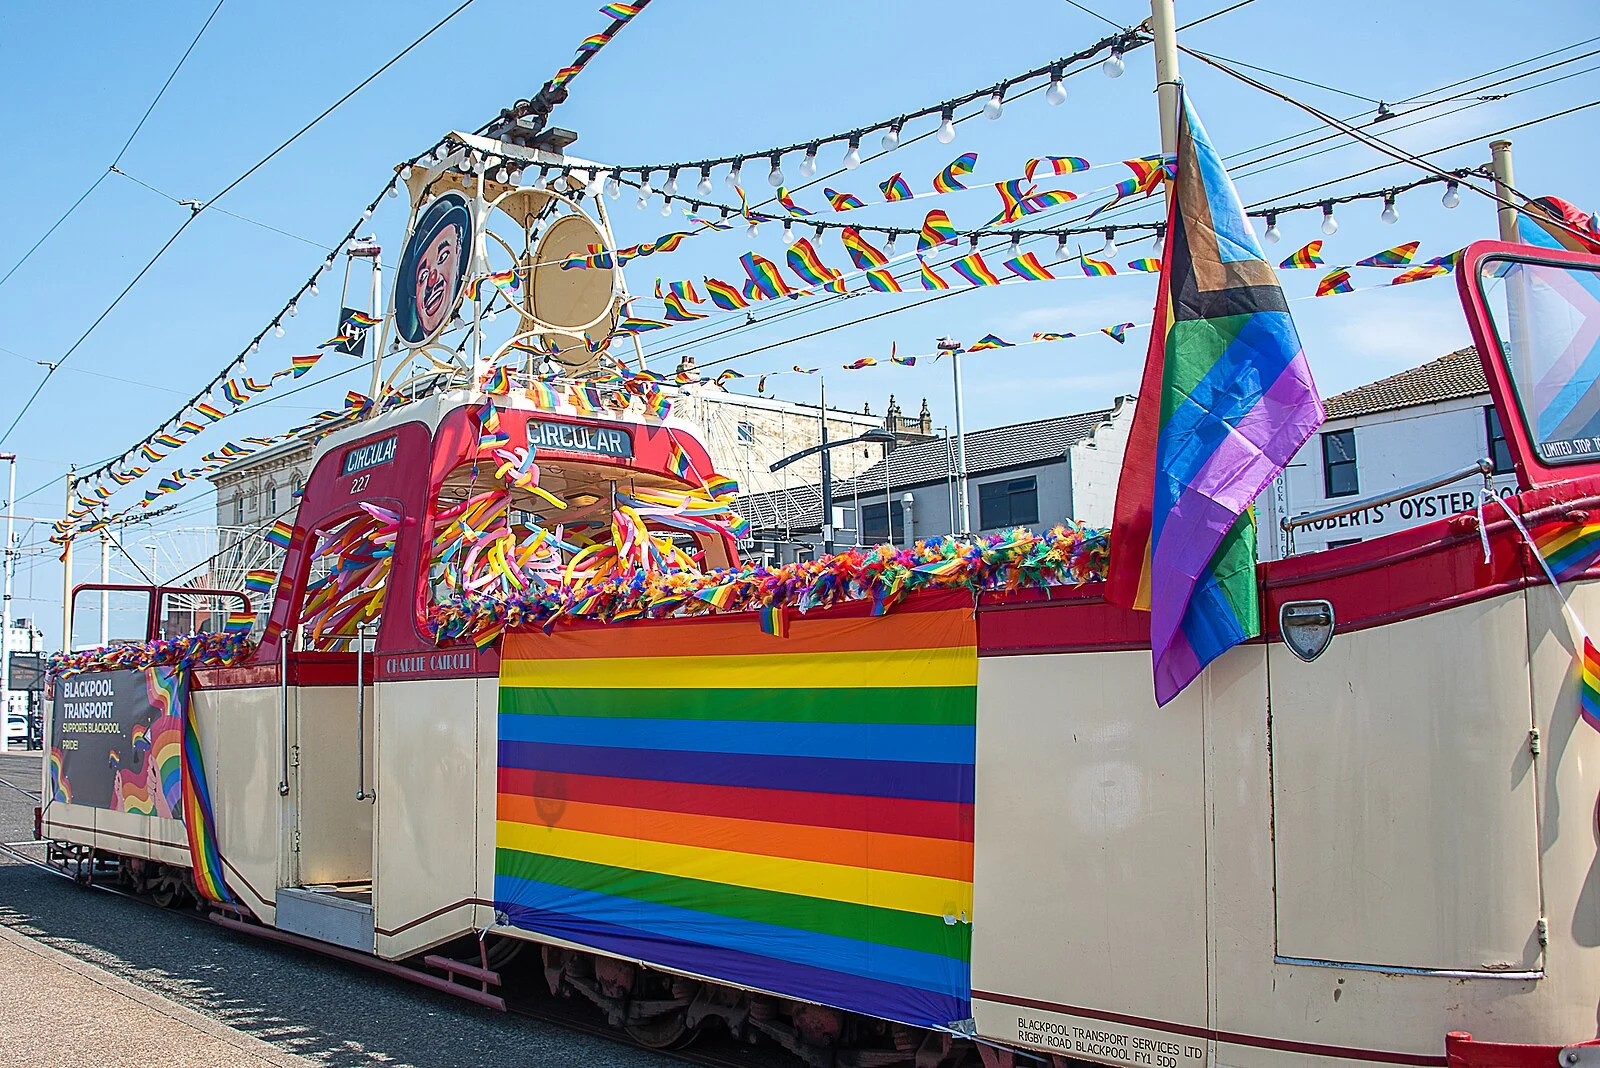 A Blackpool tram covered in rainbow flags and bunting